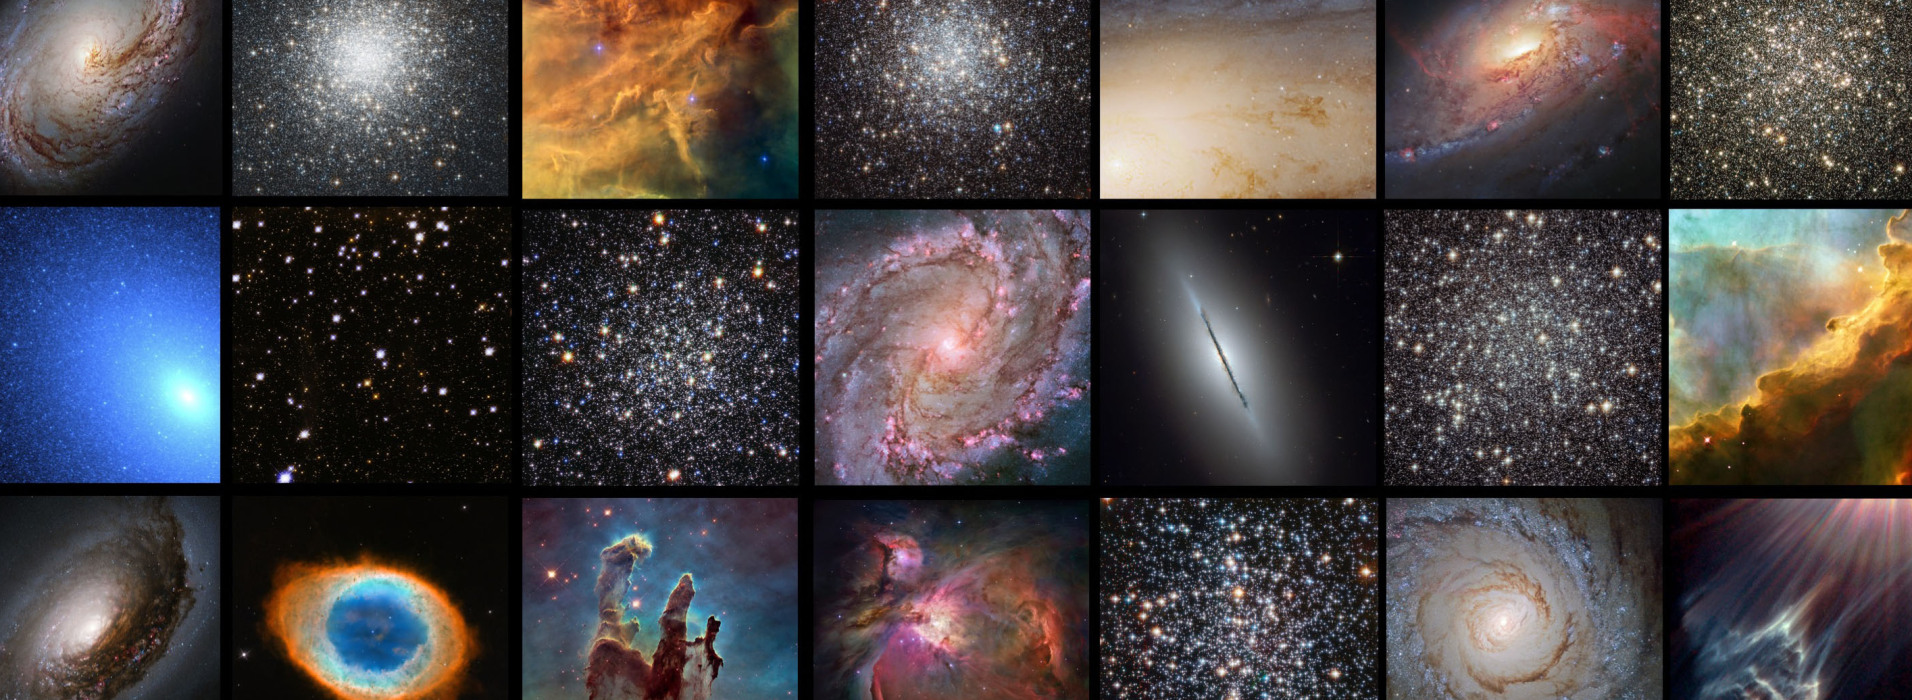 Images of nebulas, galaxies, and stars